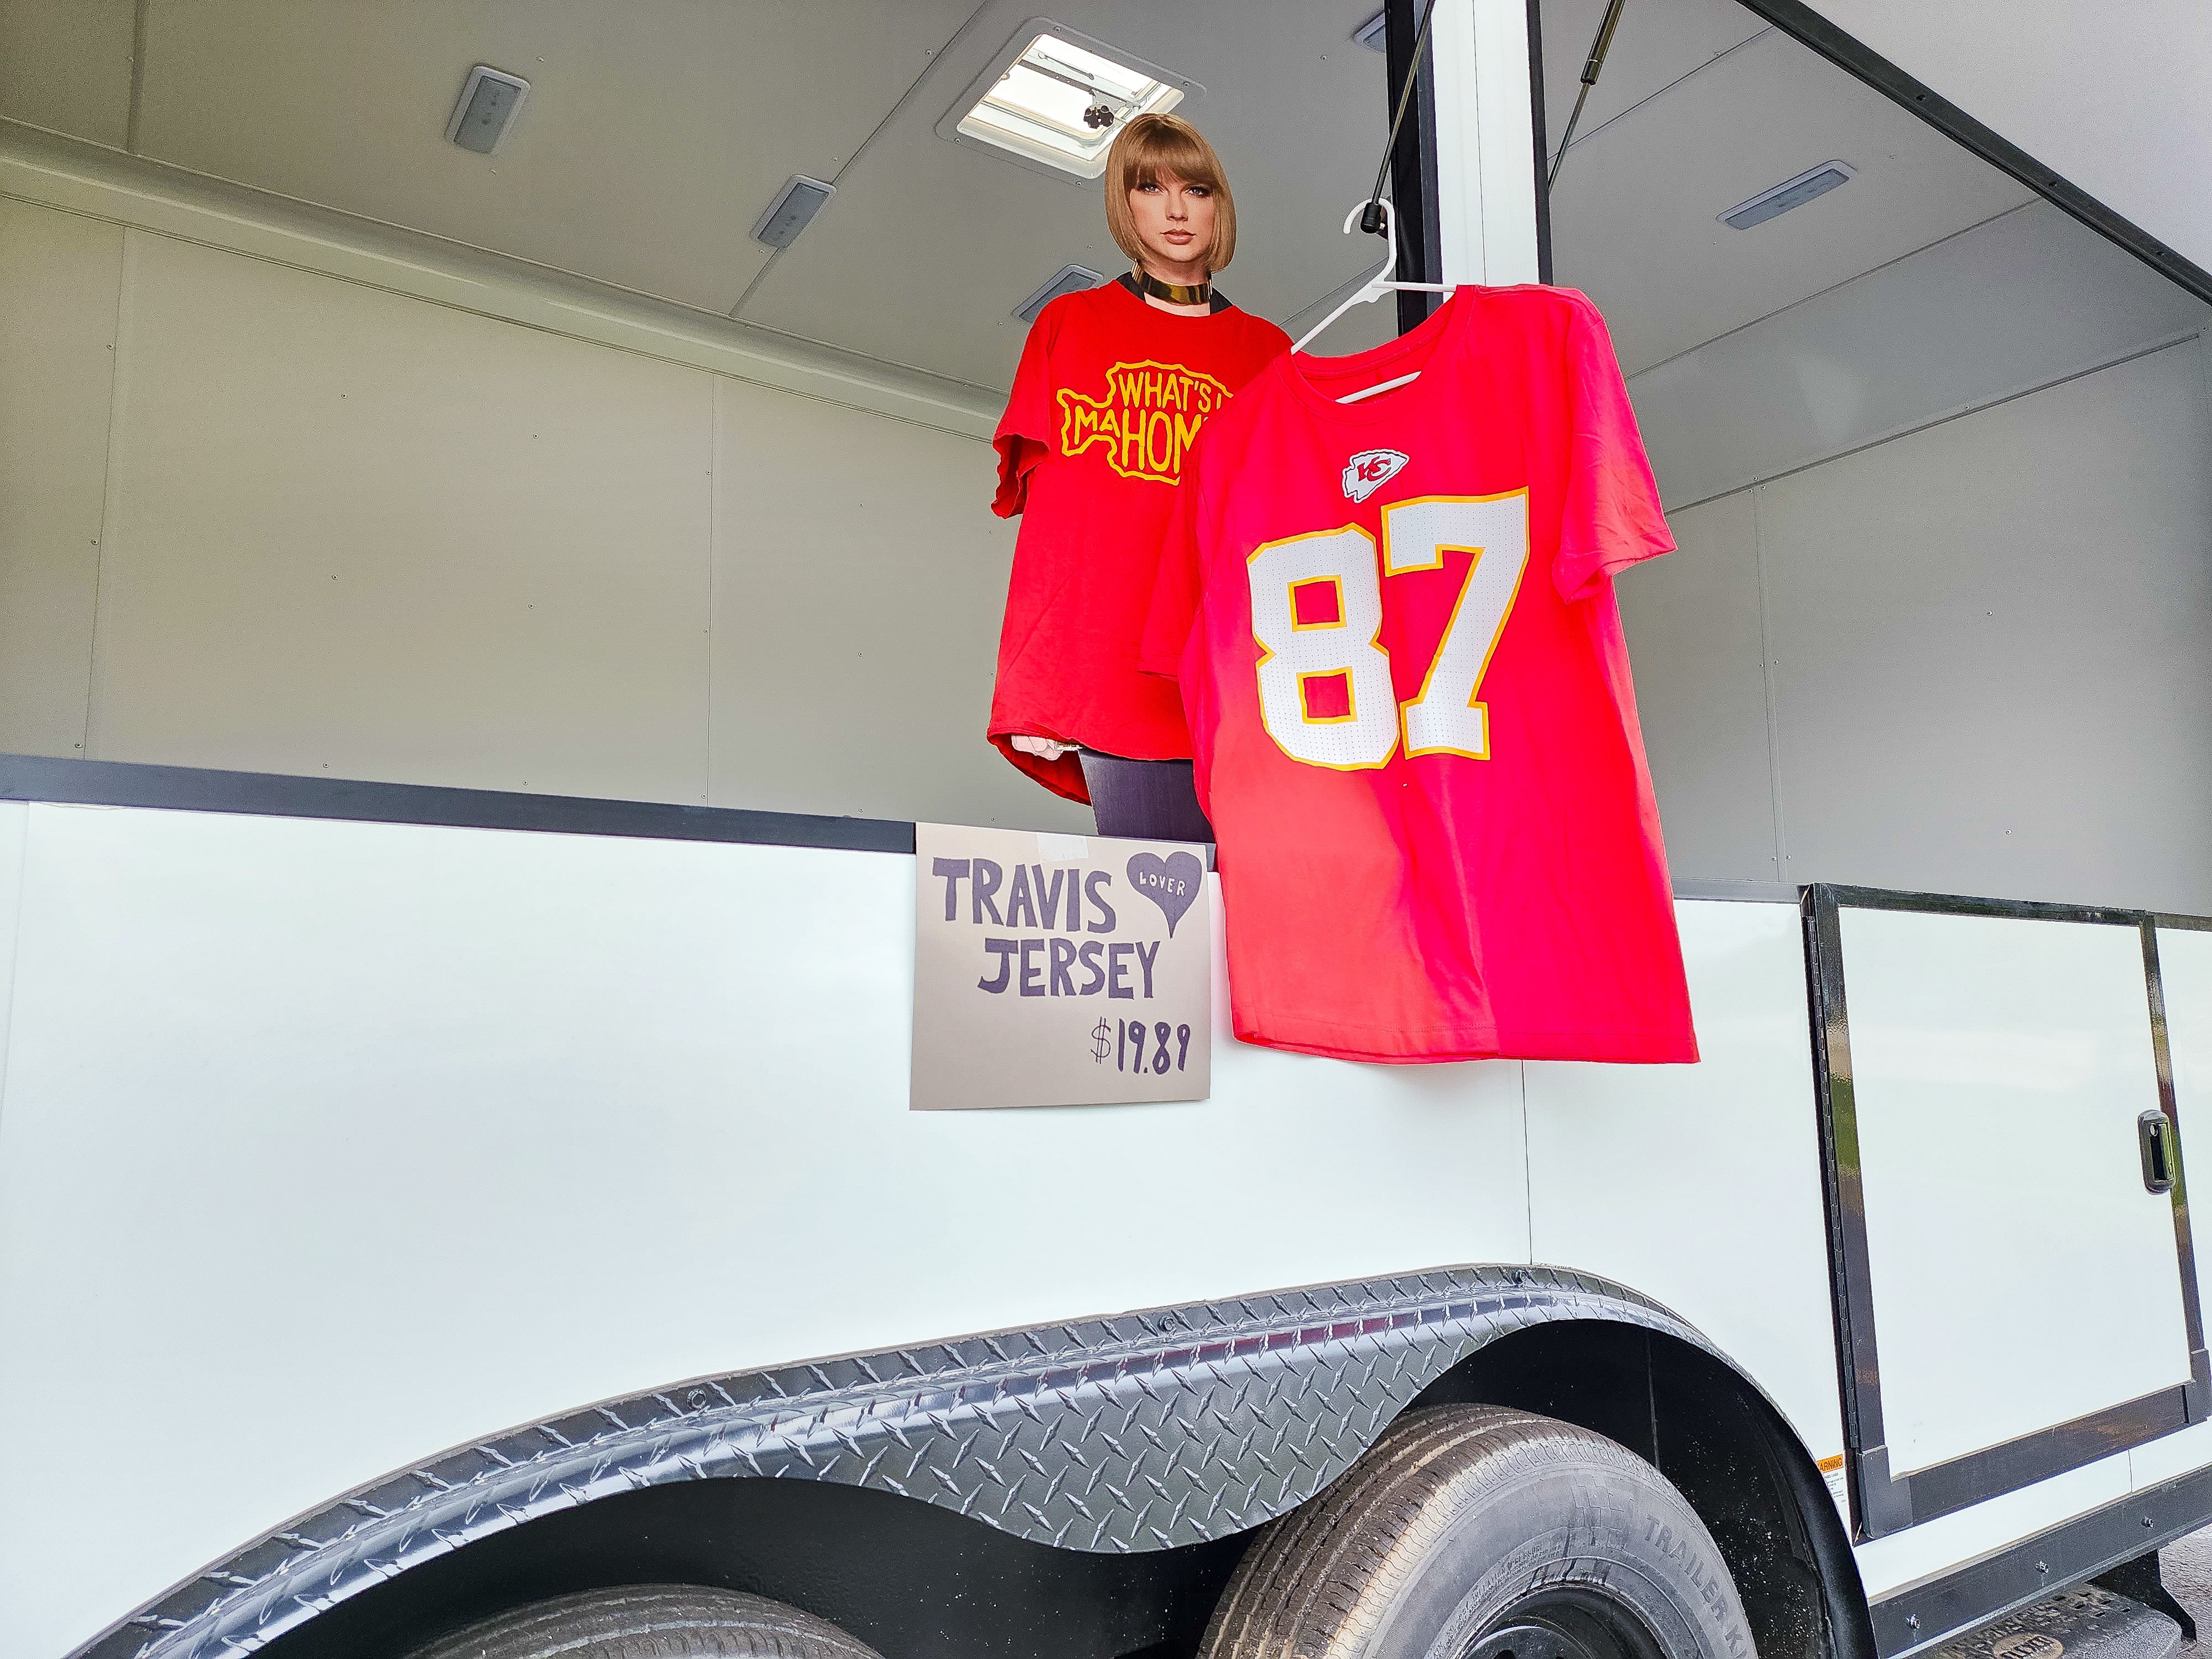 The Chiefs play the Packers tonight so Taylor is pushing Kelce gear in Chicagoland